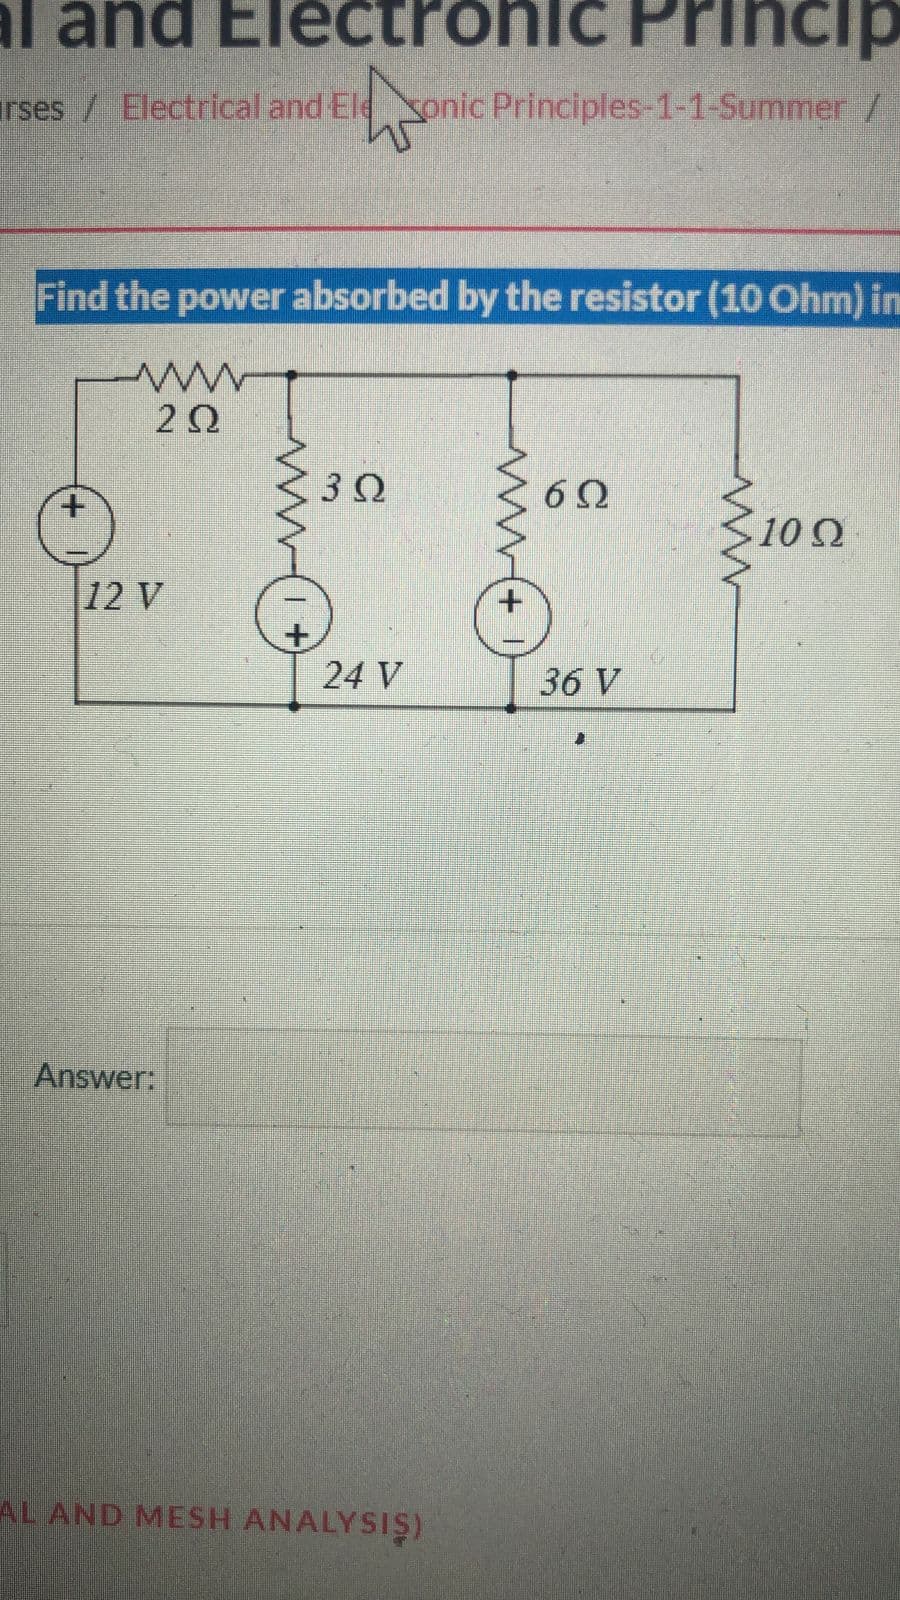 al and Electronic Princip
rses / Electrical and Eleonic Principles-1-1-Summer /
W
Find the power absorbed by the resistor (10 Ohm) in
www
ΖΩ
12 V
Answer:
3Ω
24 V
AL AND MESH ANALYSIS)
www
6Ω
36 V
10 Ω